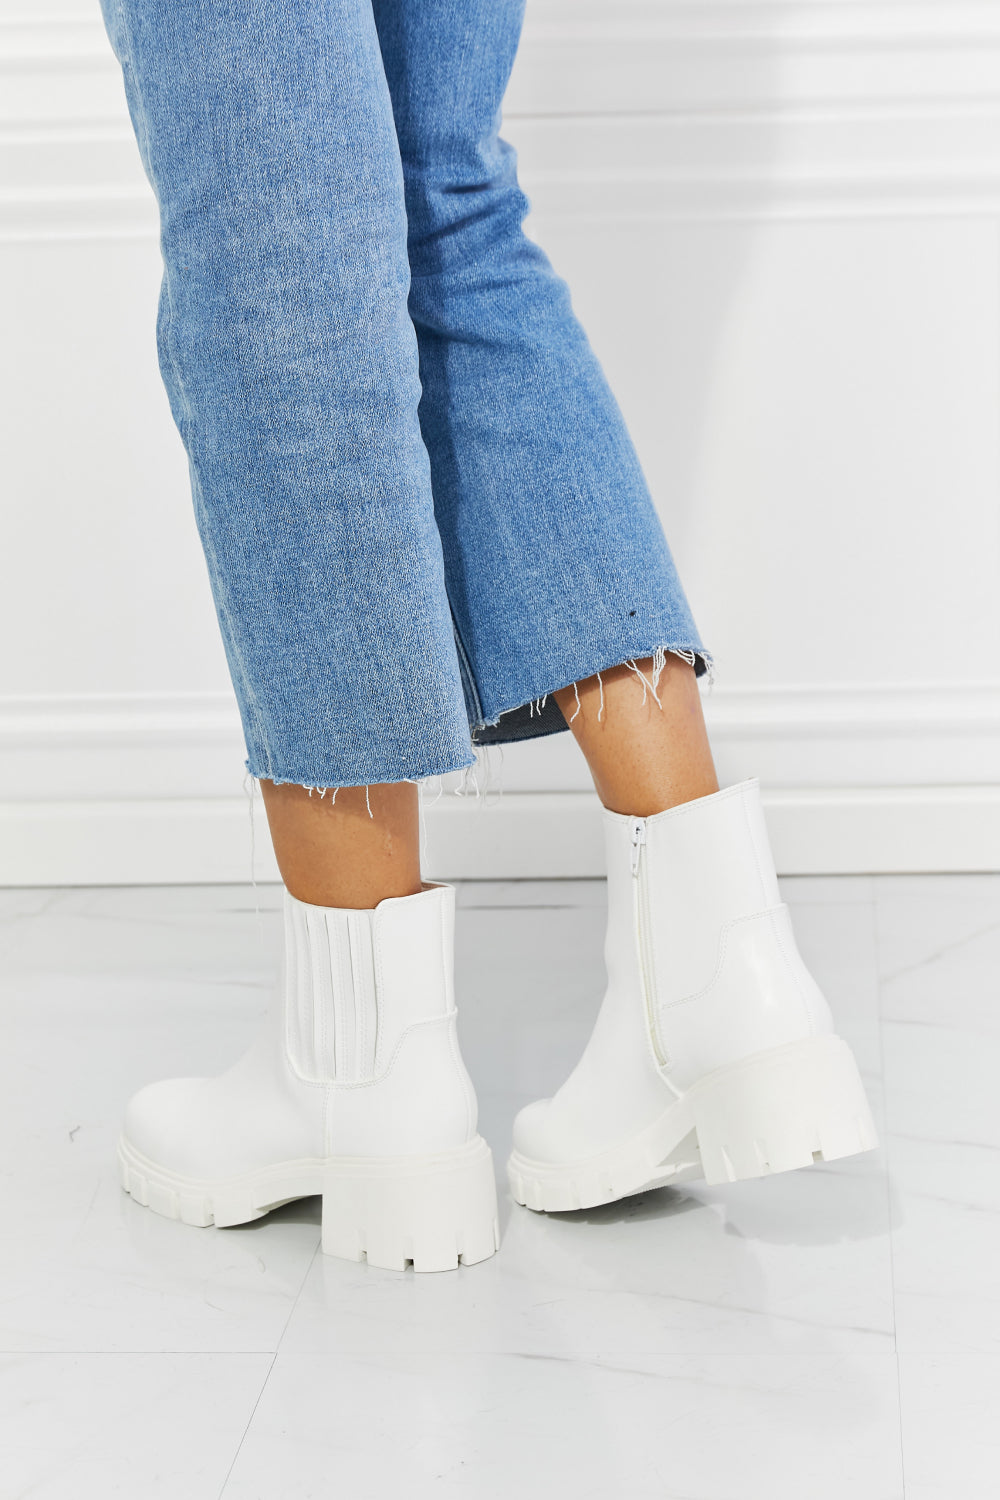 MMShoes Lug Sole Platform Chunky Thick Sole Chelsea Ankle Bootie Boots in White What It Takes